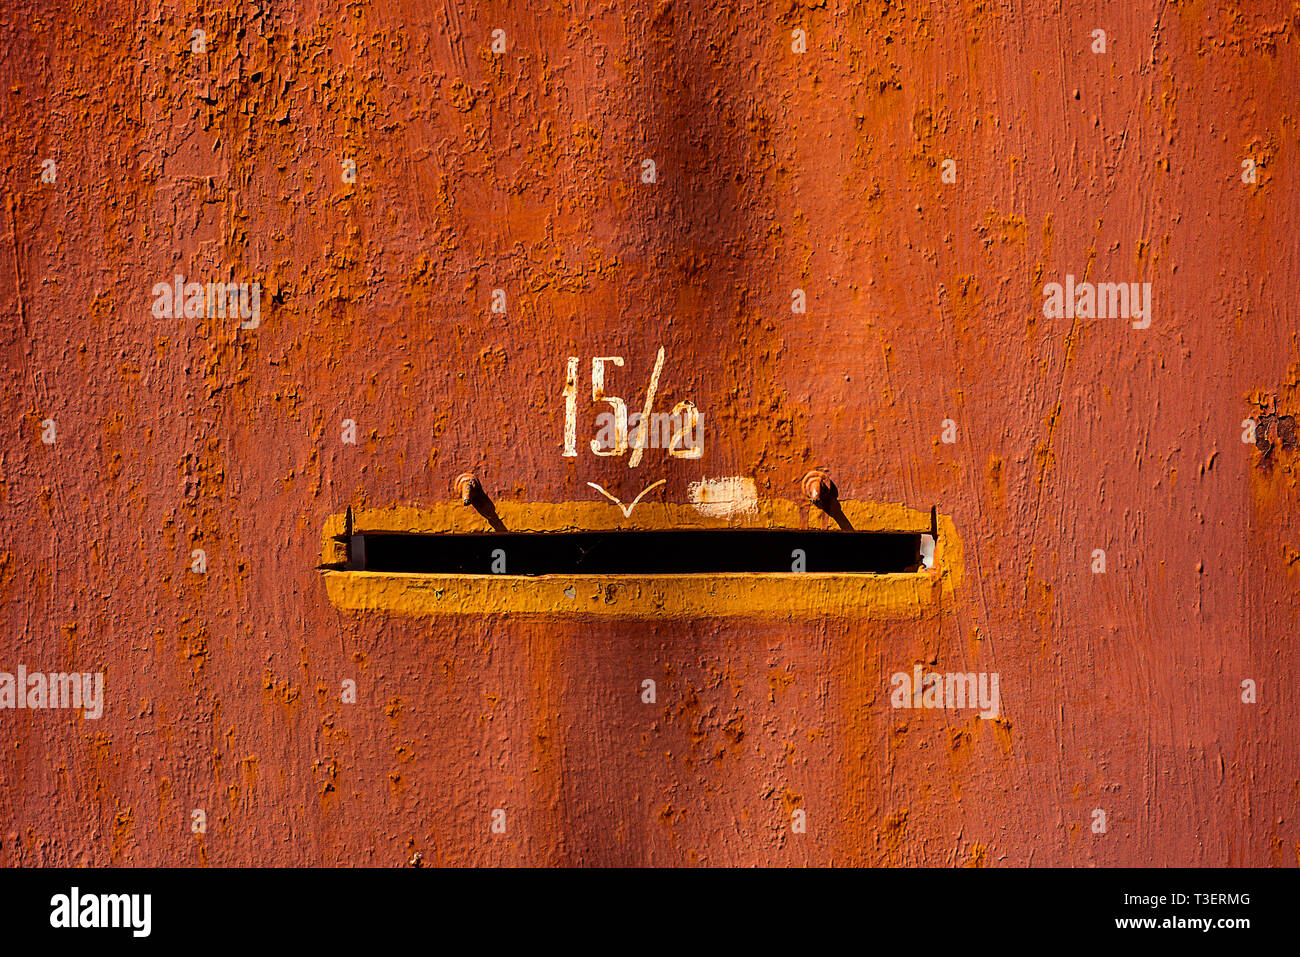 Close-up old red painted metal door with number fifteen fractions two and mail hole. Horizontal texture of cracked paint on rusty steel Stock Photo